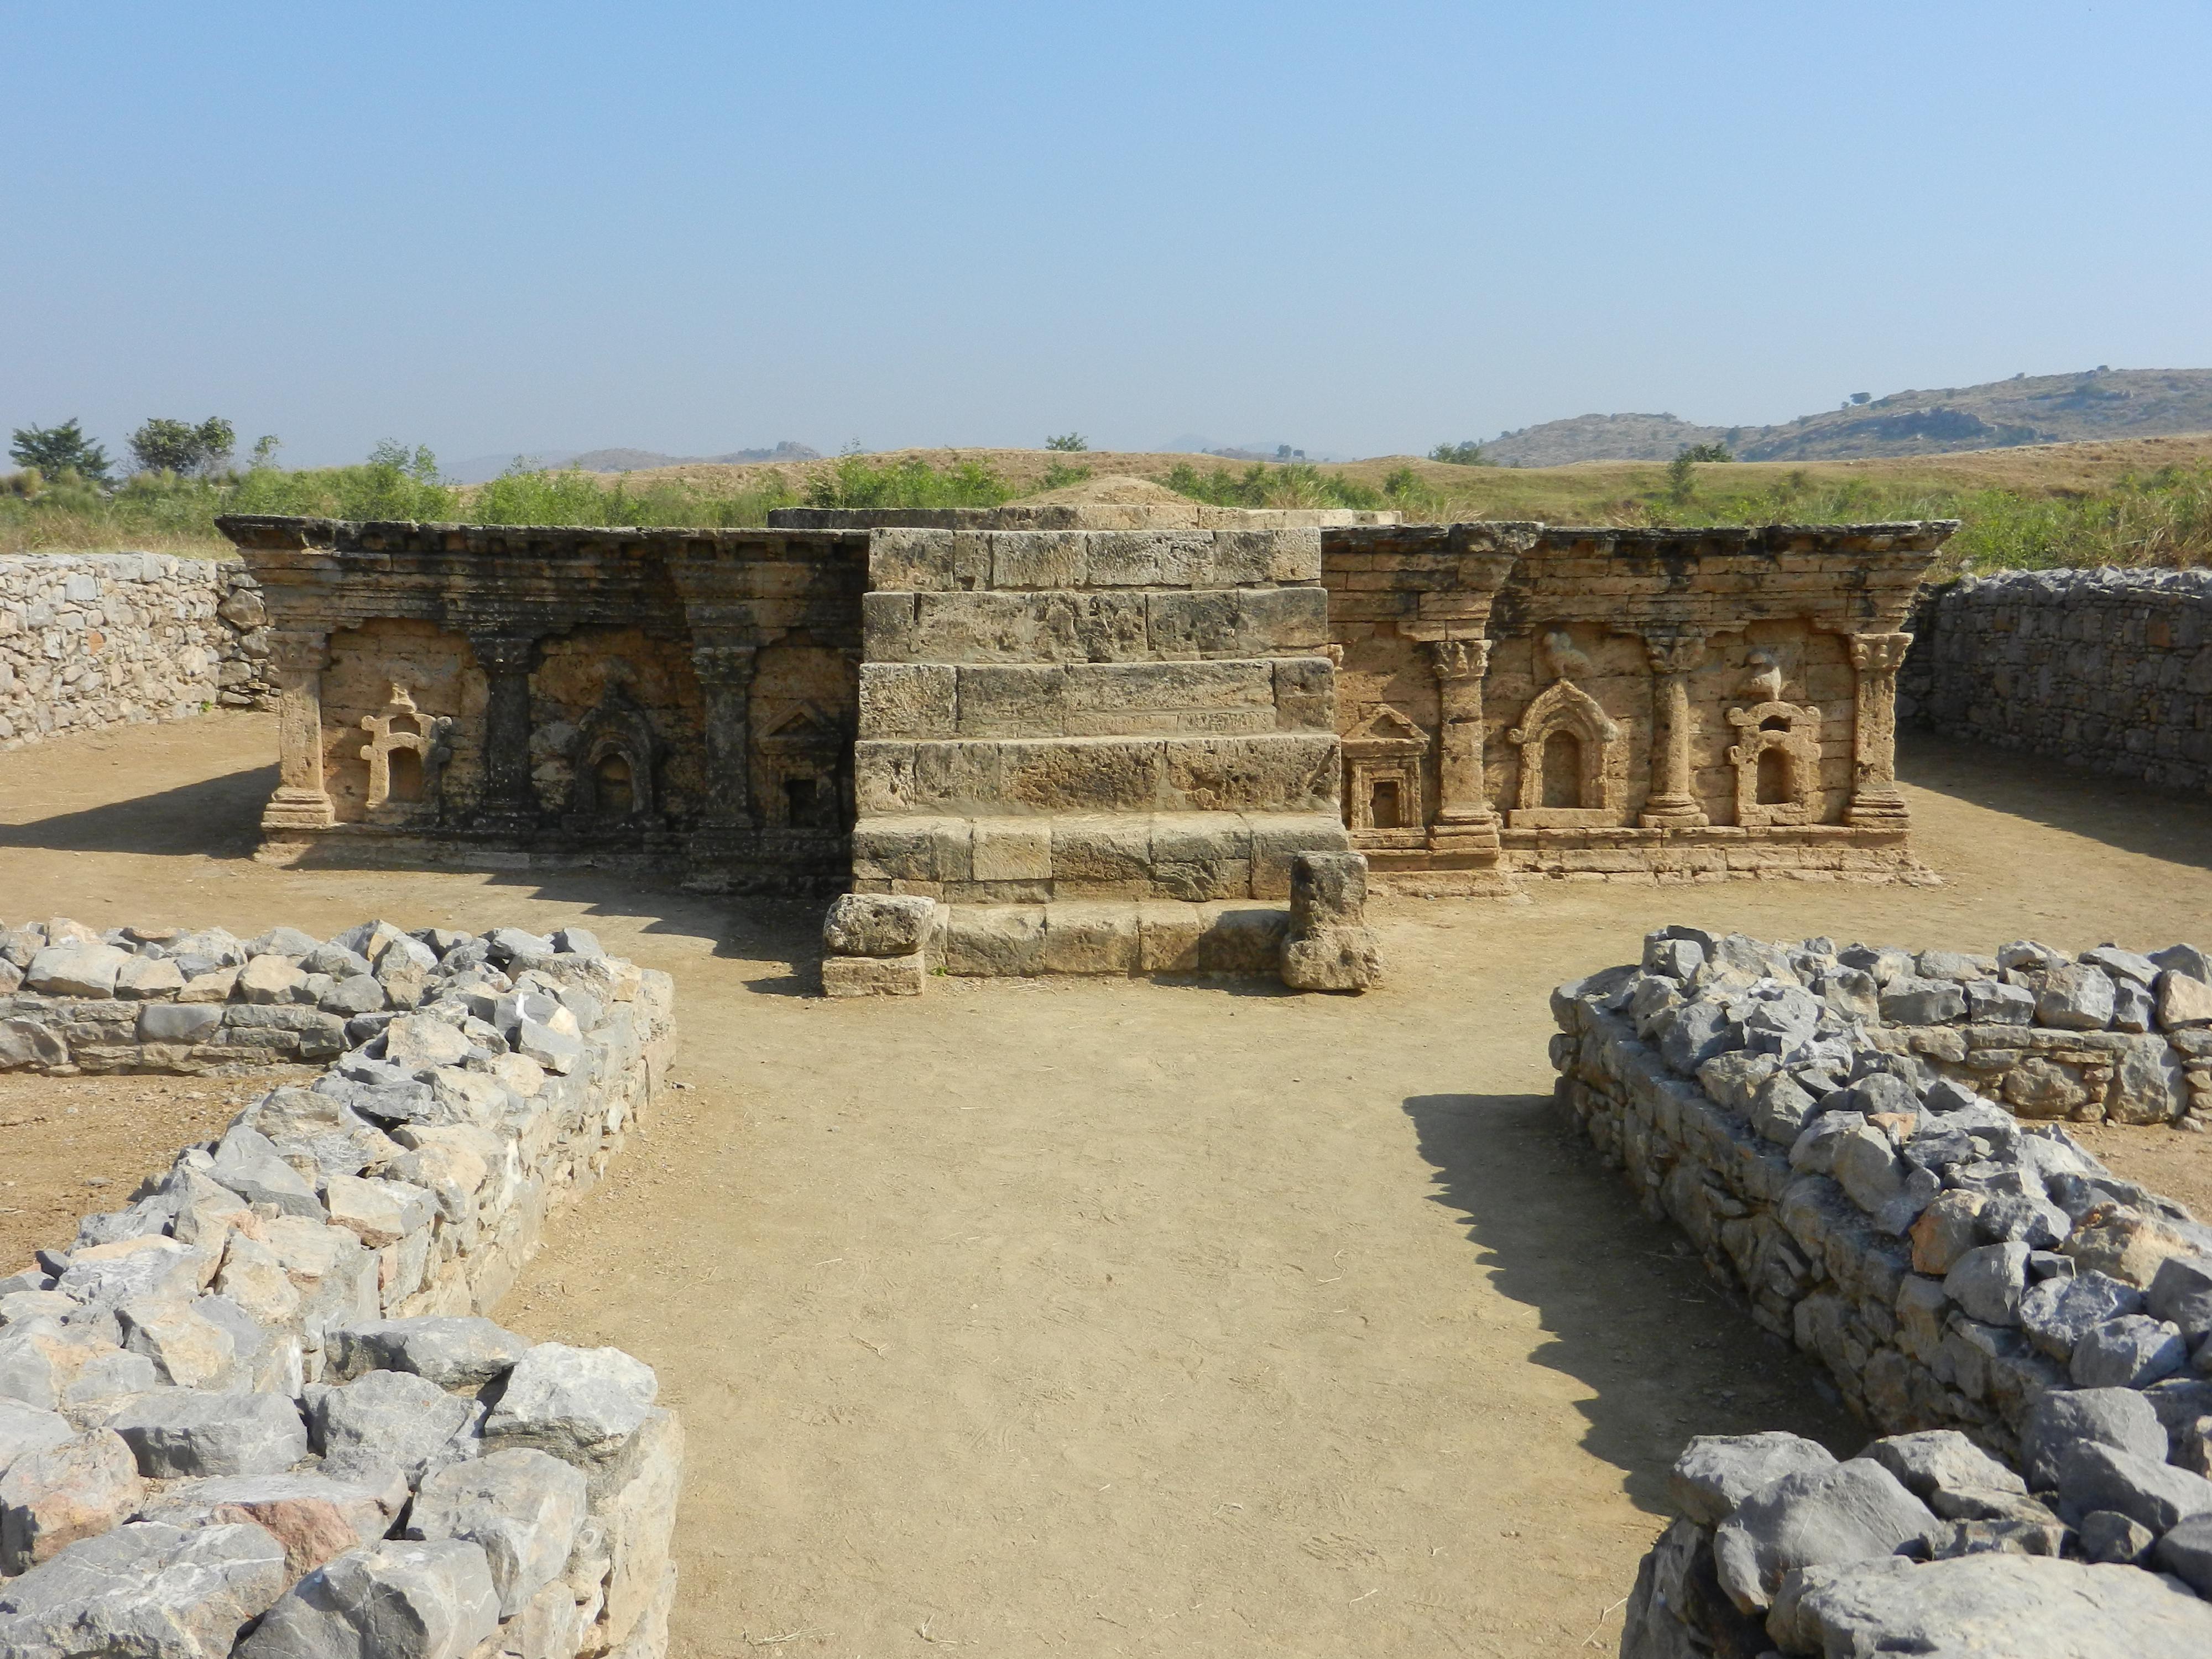 The Double-Headed Eagle Stupa was a public shrine which housed religious relics during the Indo-Scythian stage at Sirkap, showcasing Buddhist, Hellenistic, and even Babylonian artistic influences in South Asia. The settlement was previously Greco-Bactrian. 1st century BCE. Taxila, Pakistan.